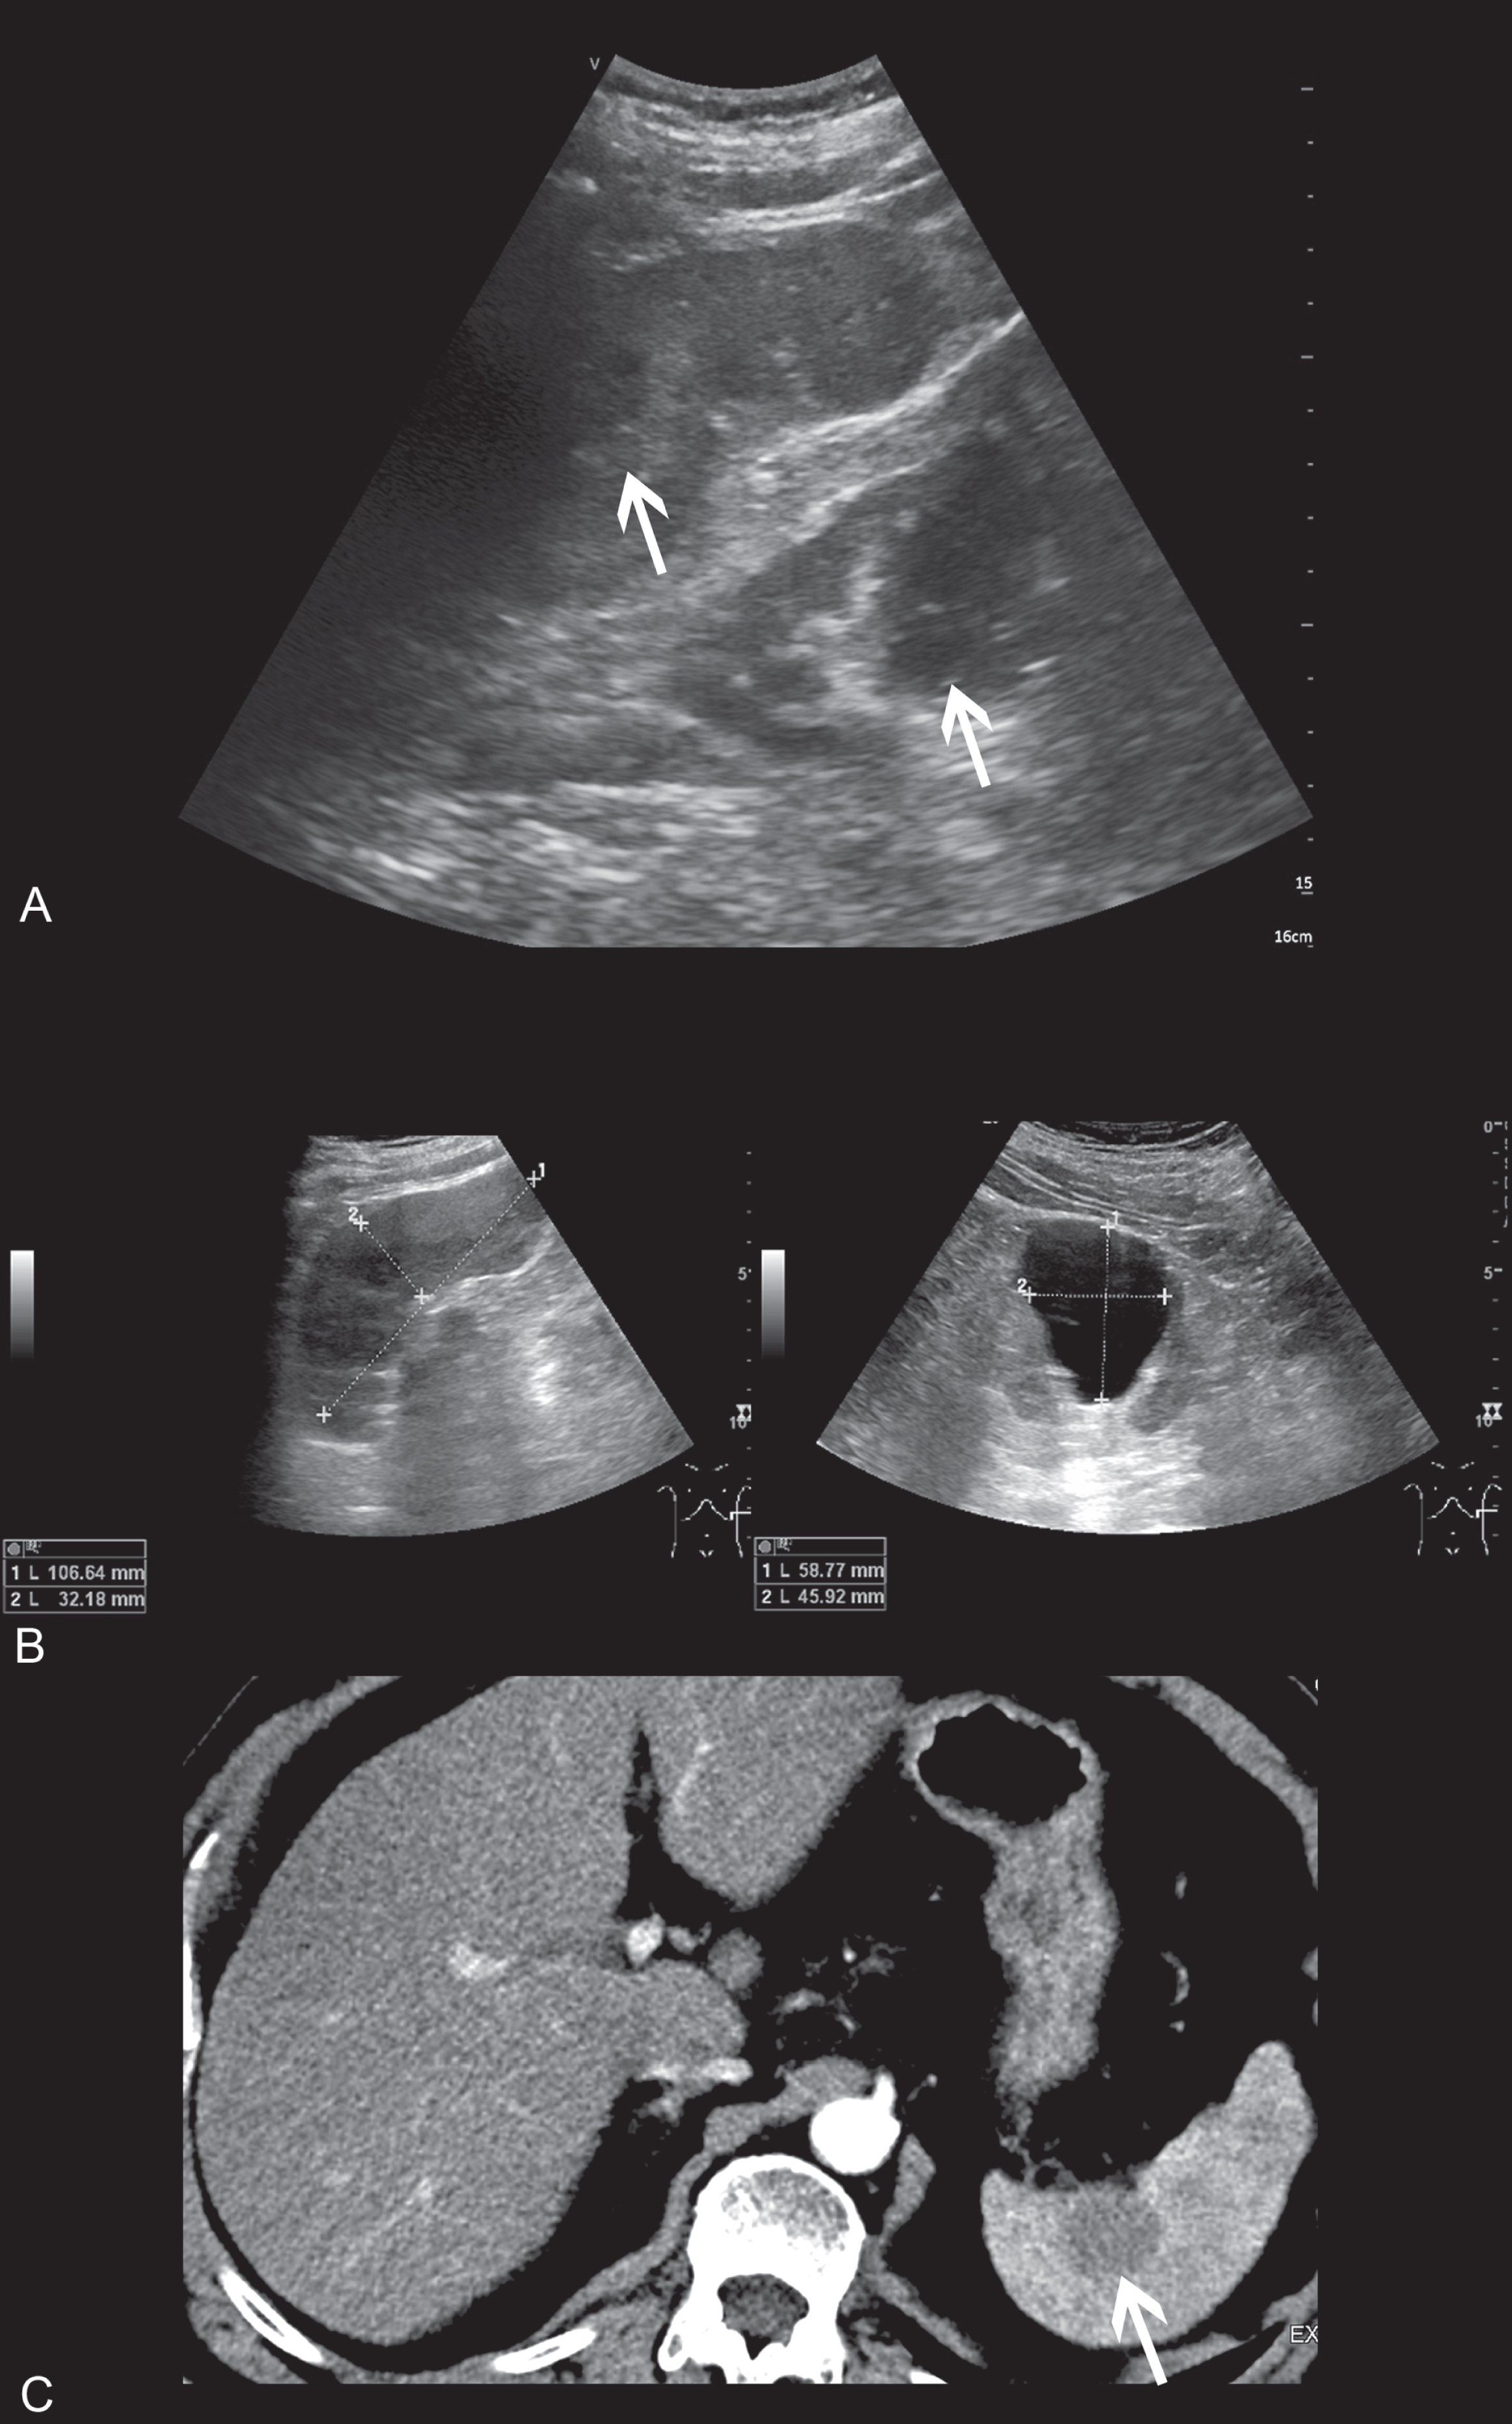 72 year old patient, diagnosed with T4 tonsillar carcinoma, who underwent CT for evaluation of metastatic lesions. A: Vscan image of the upper abdomen showed hypoechogenic splenic and renal lesions, marked with arrow. Image quality was rated as 2 due to blurring and low resolution. B: High-end ultrasound image confirmed the hypoechogenic renal and splenic lesions. Images are displayed with a much better resolution and quality (rated as 3). C: Corresponding CT scan of the upper abdomen that showed multiple obscure splenic hypodensities with diminished contrast enhancement. Pathologies are marked with an arrow.